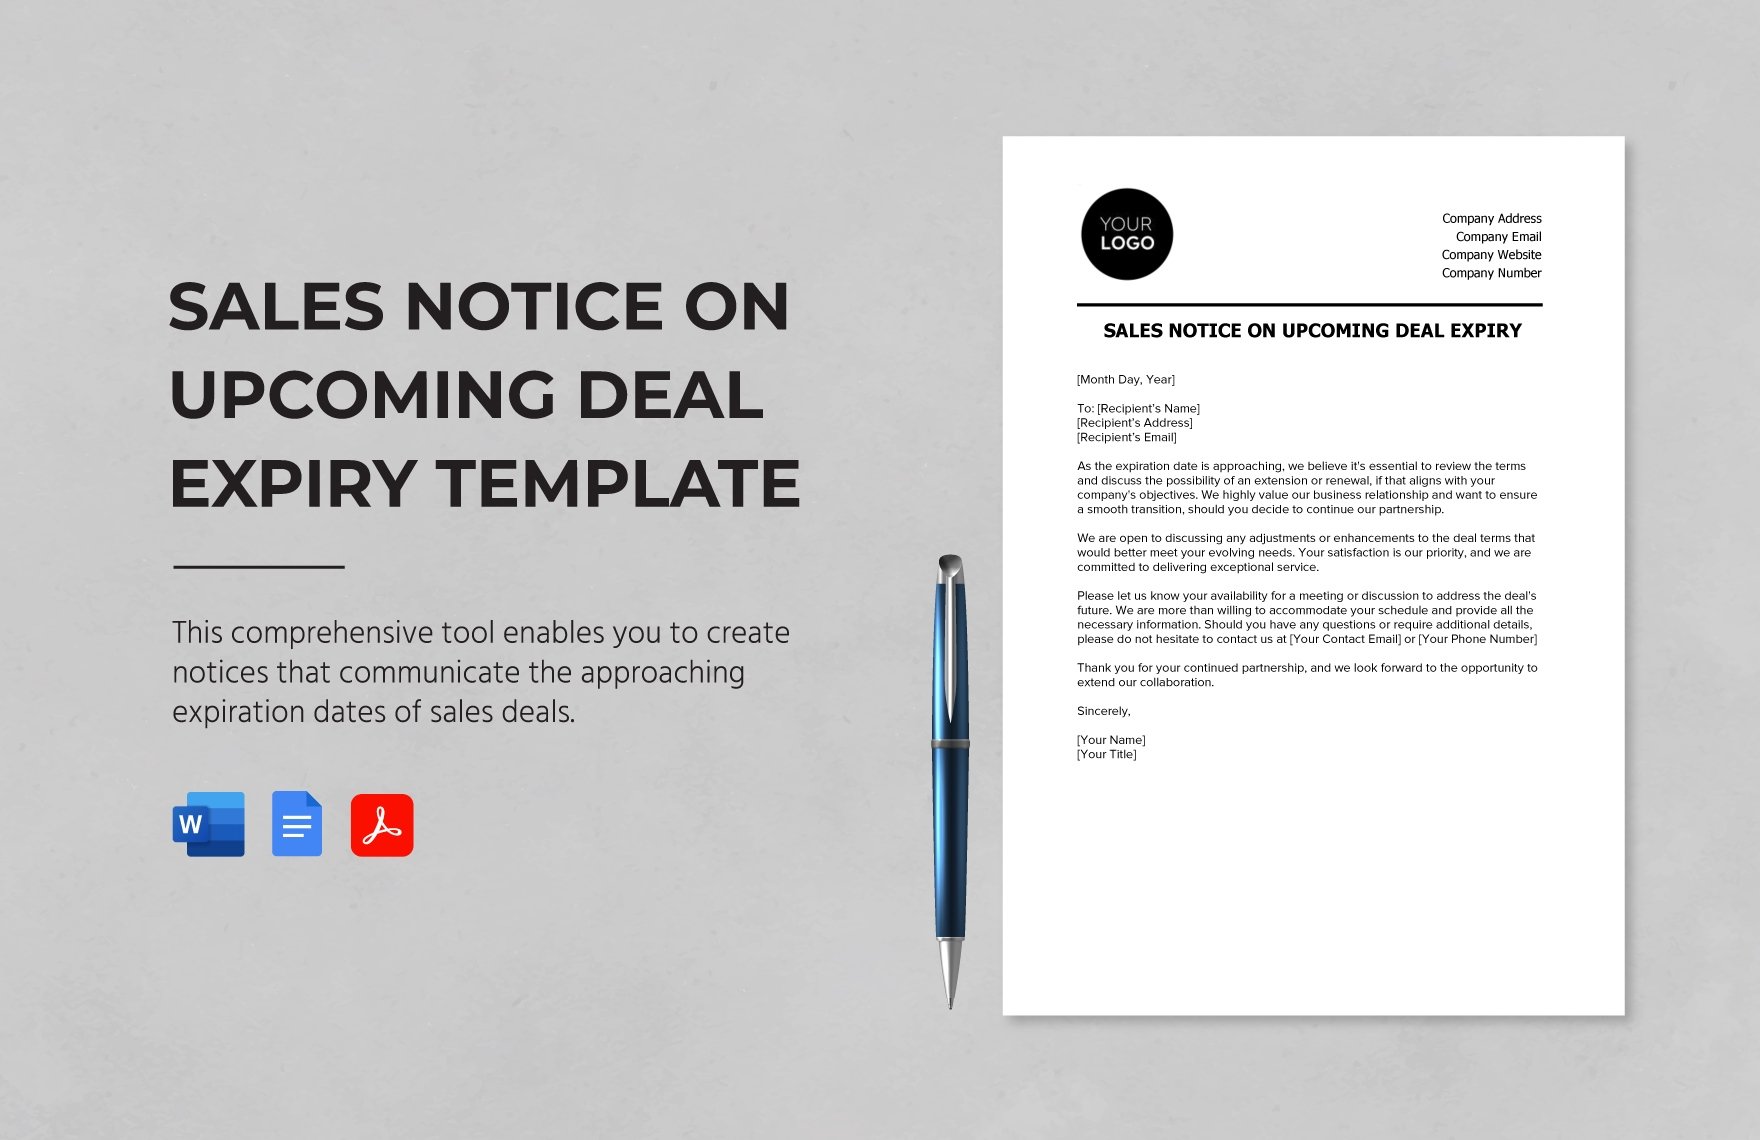 Sales Notice on Upcoming Deal Expiry Template